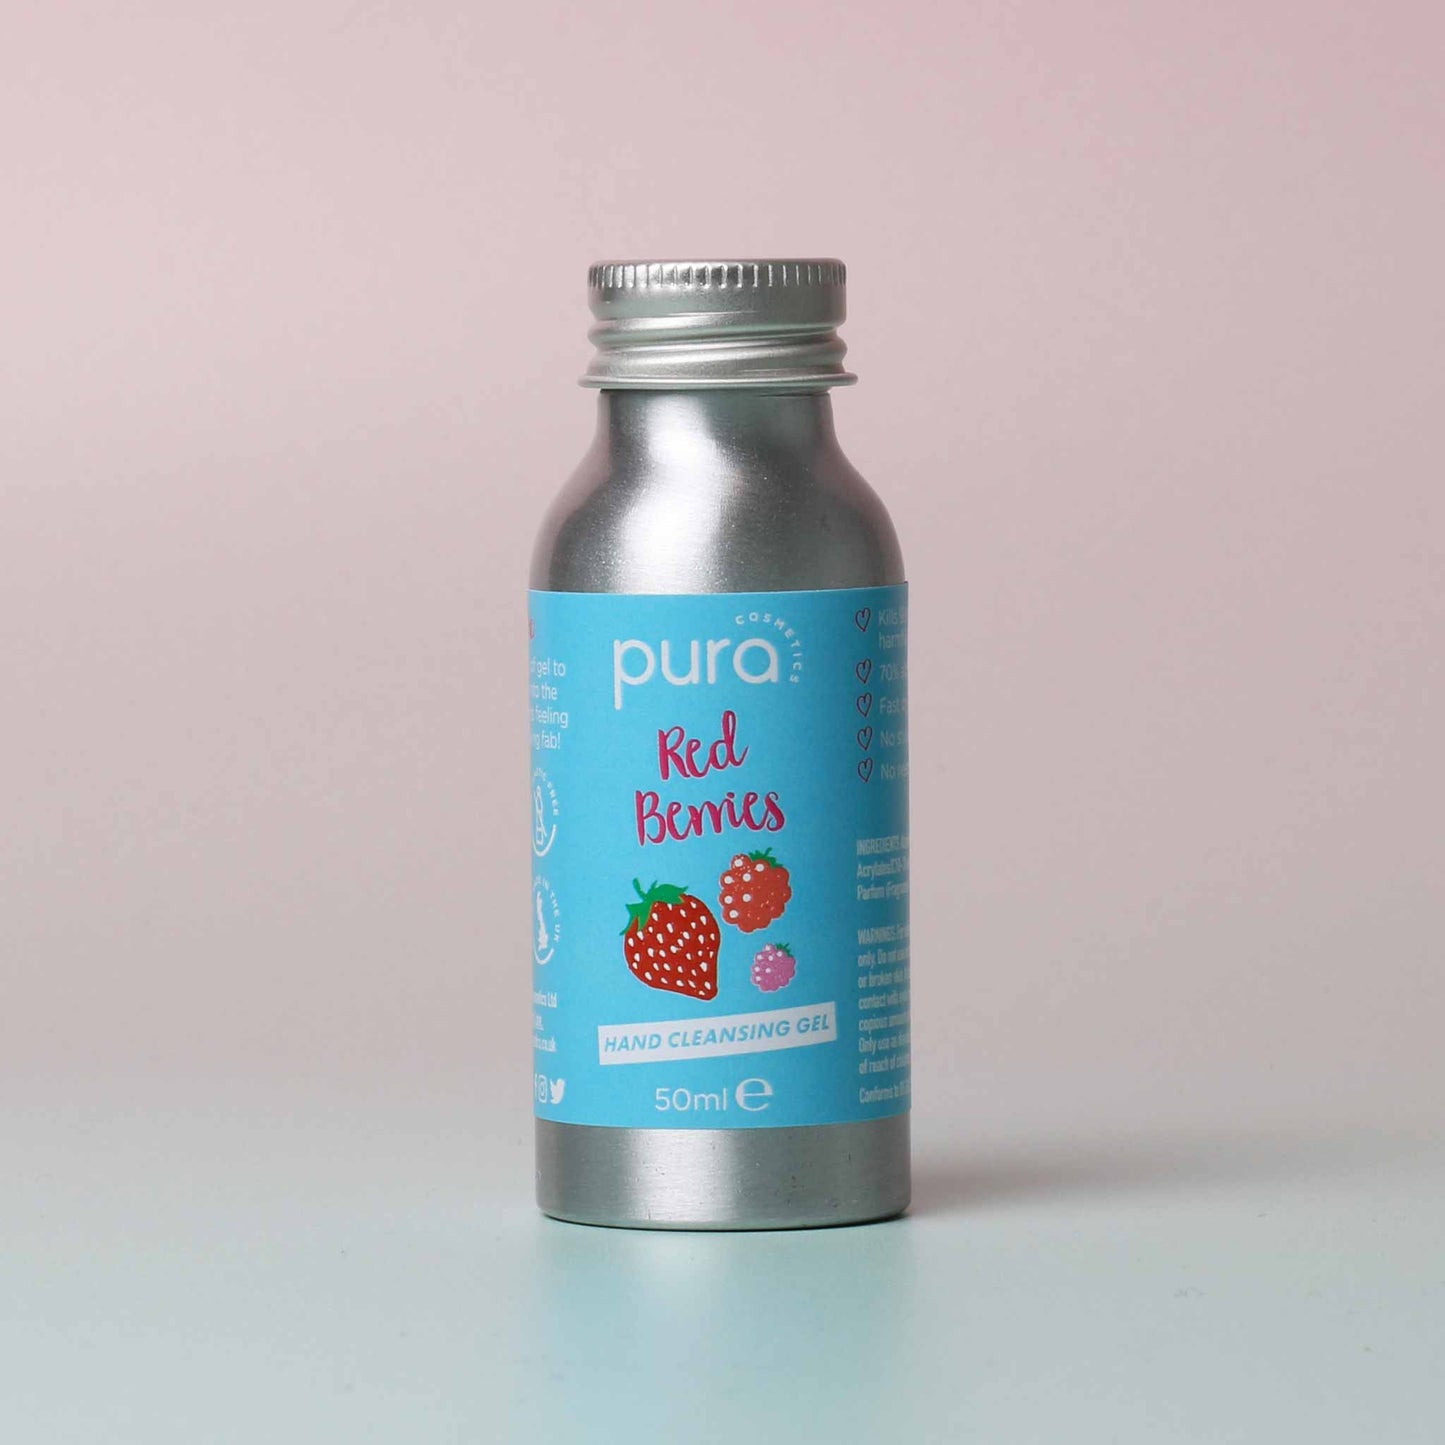 Pura Cosmetics Red Berries Hand Cleansing Gel 50ml.  Gets rid of 99% of nasty germs while still being vegan, cruelty free and UK made